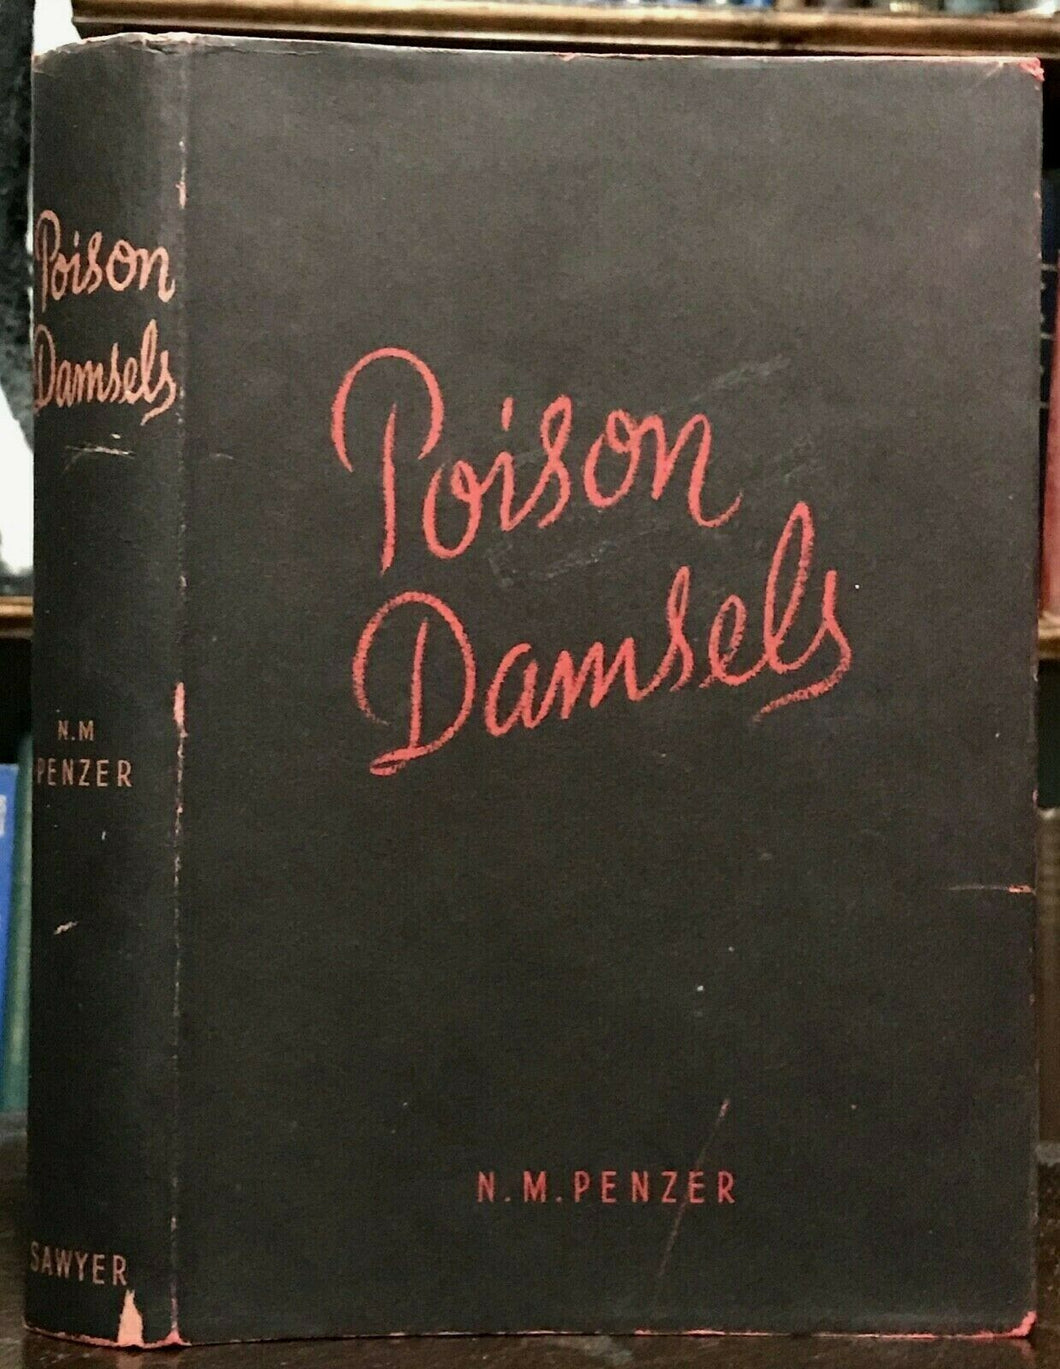 POISON-DAMSELS AND OTHER ESSAYS IN FOLKLORE - Ltd Ed, 1952 EROTICA PROSTITUTION